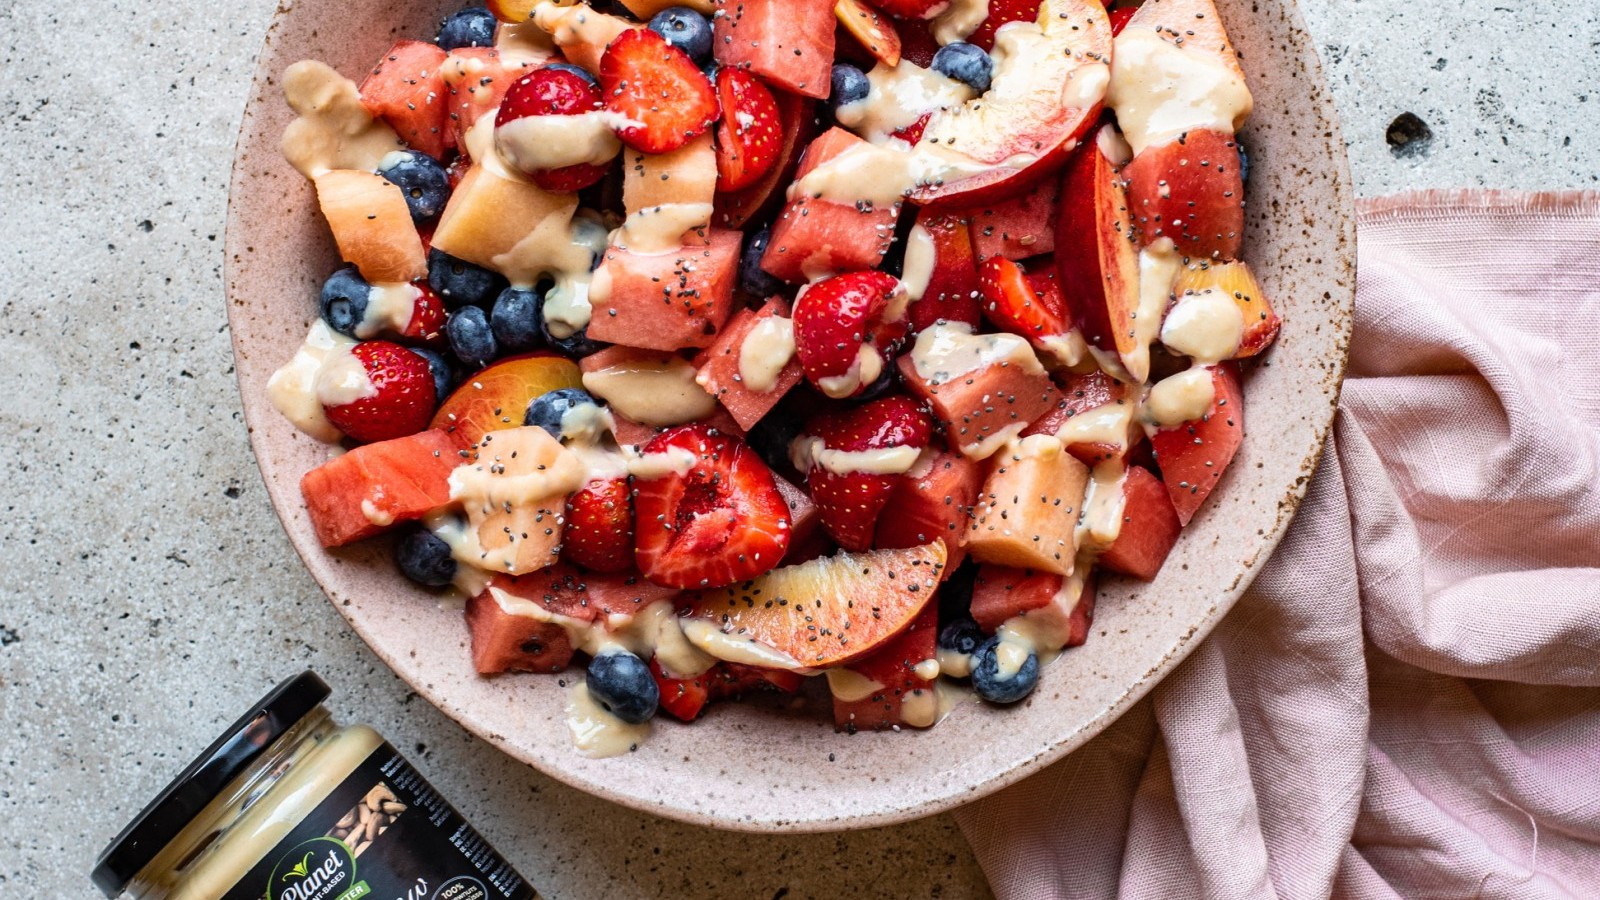 Image of Creamy Cashew Butter Fruit Salad with Chia